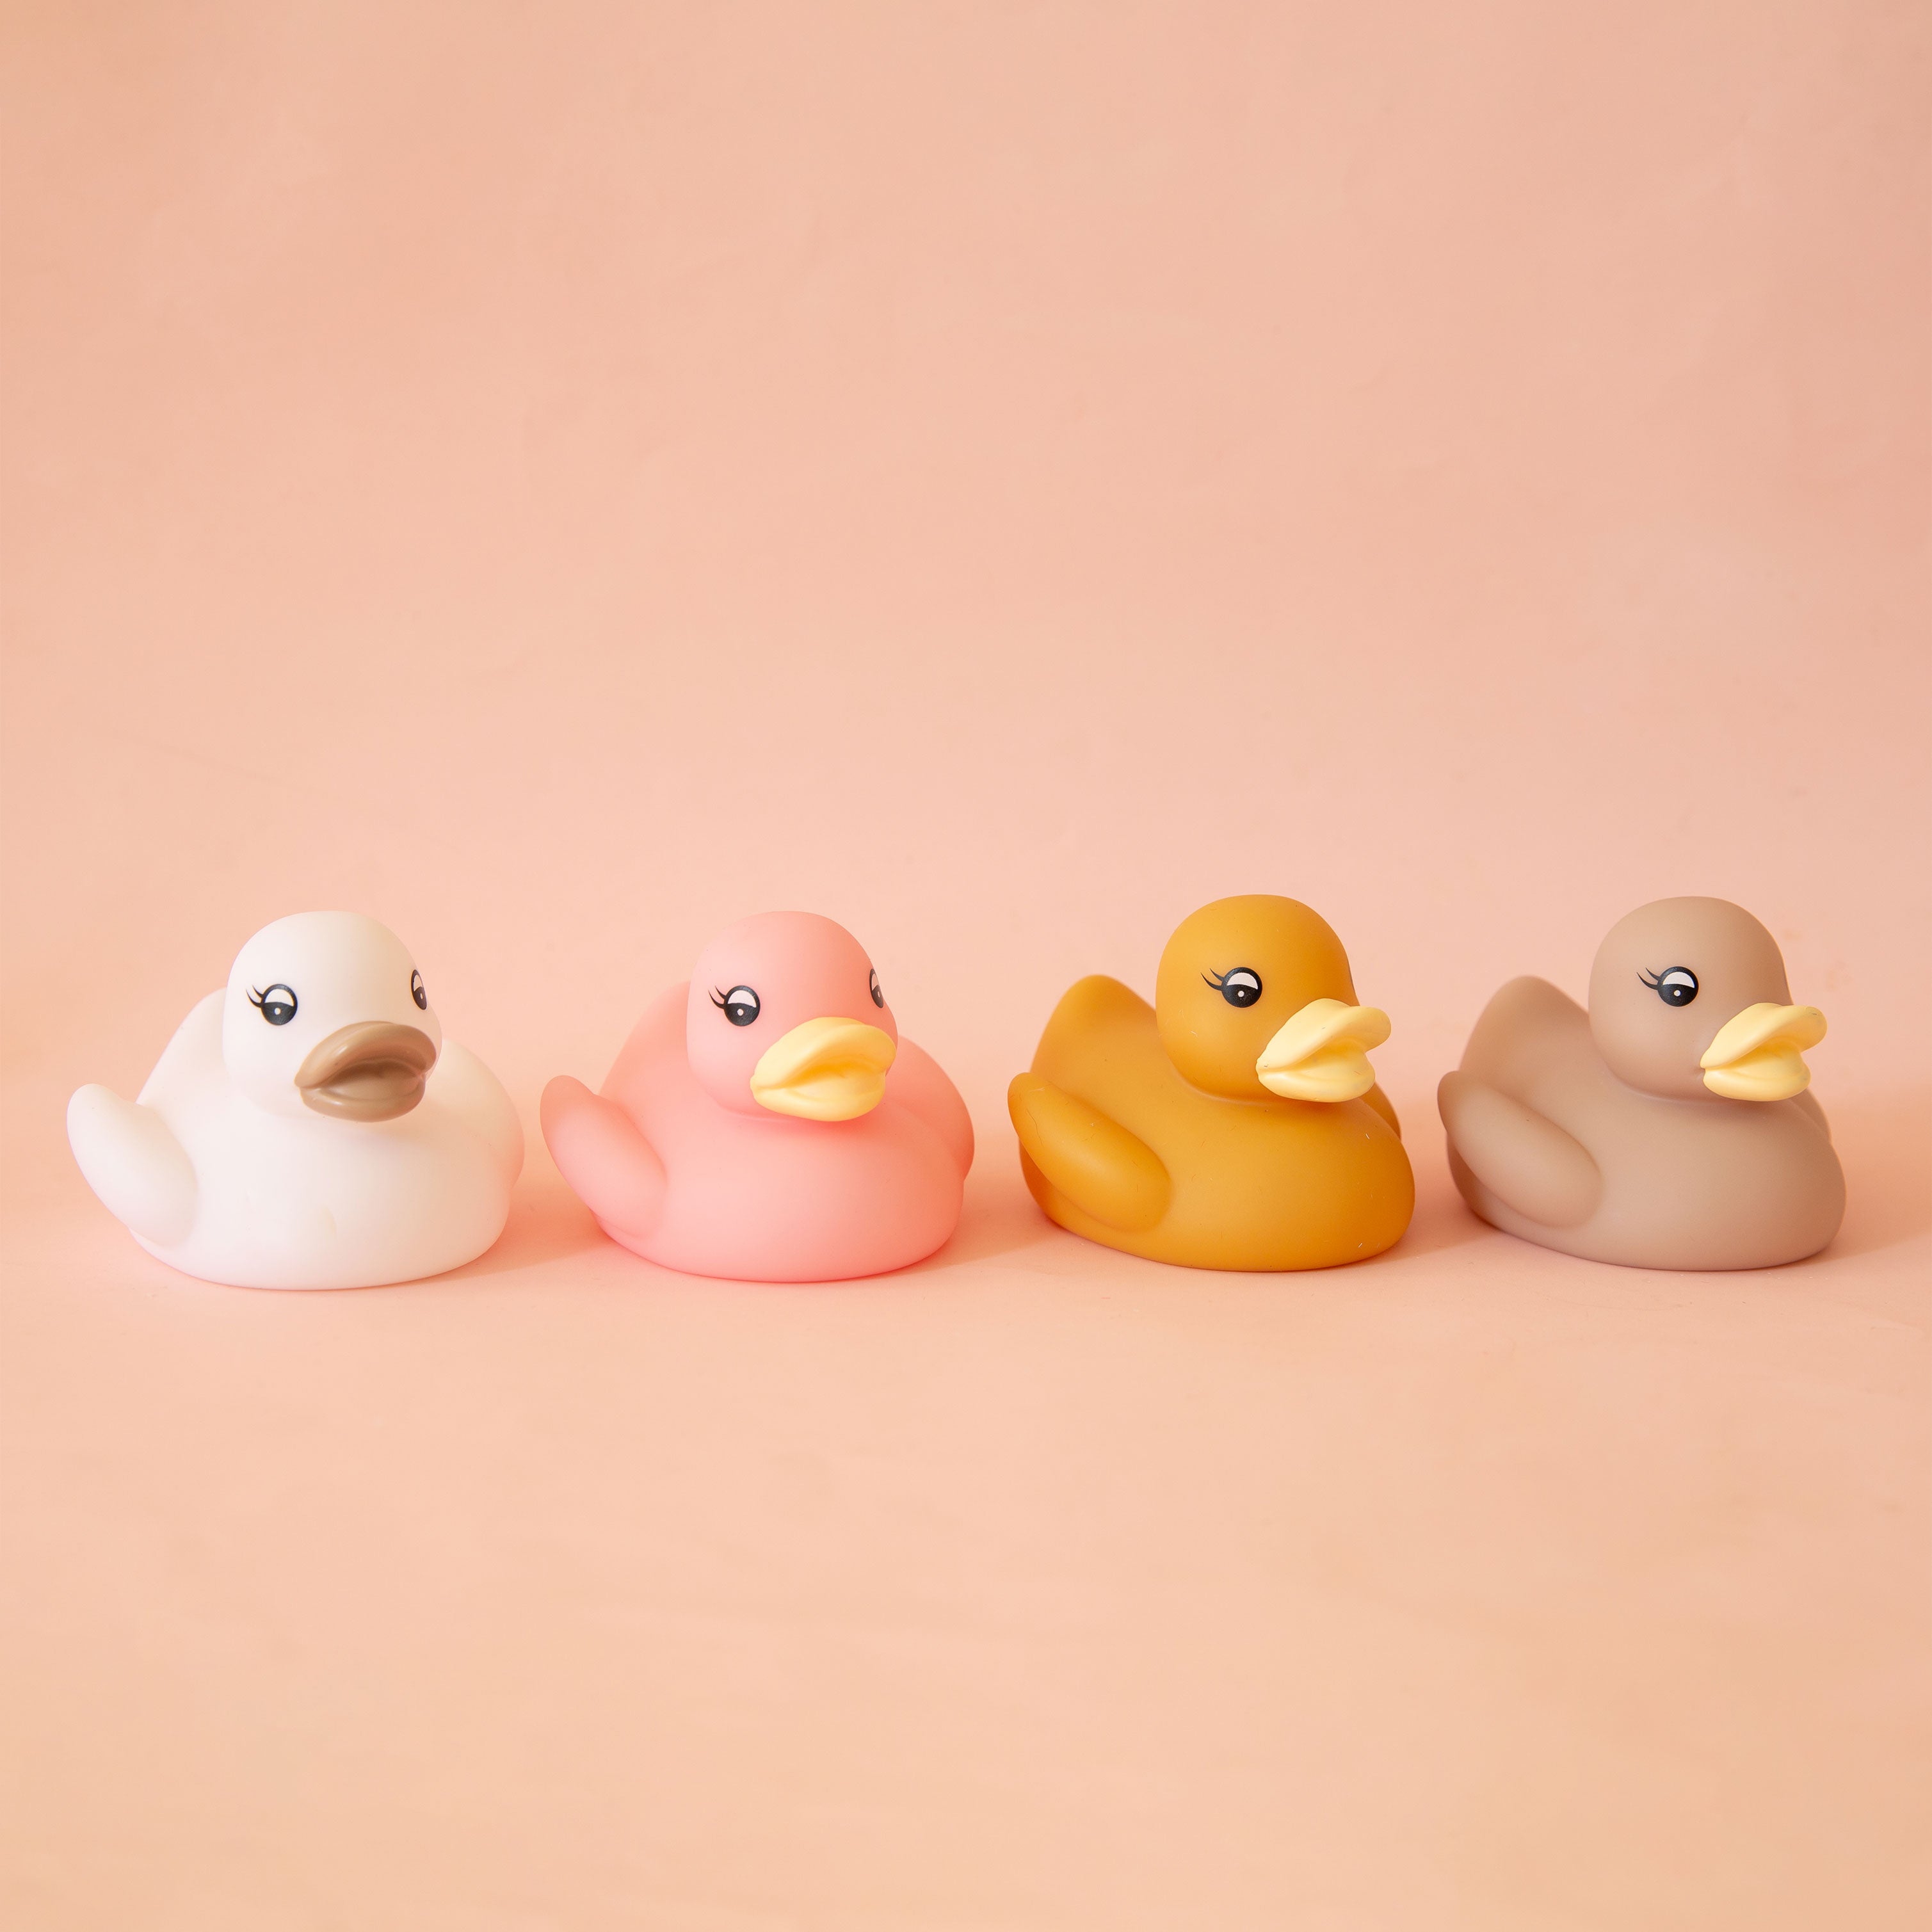 On a peach background is a set of four bath time ducks. 